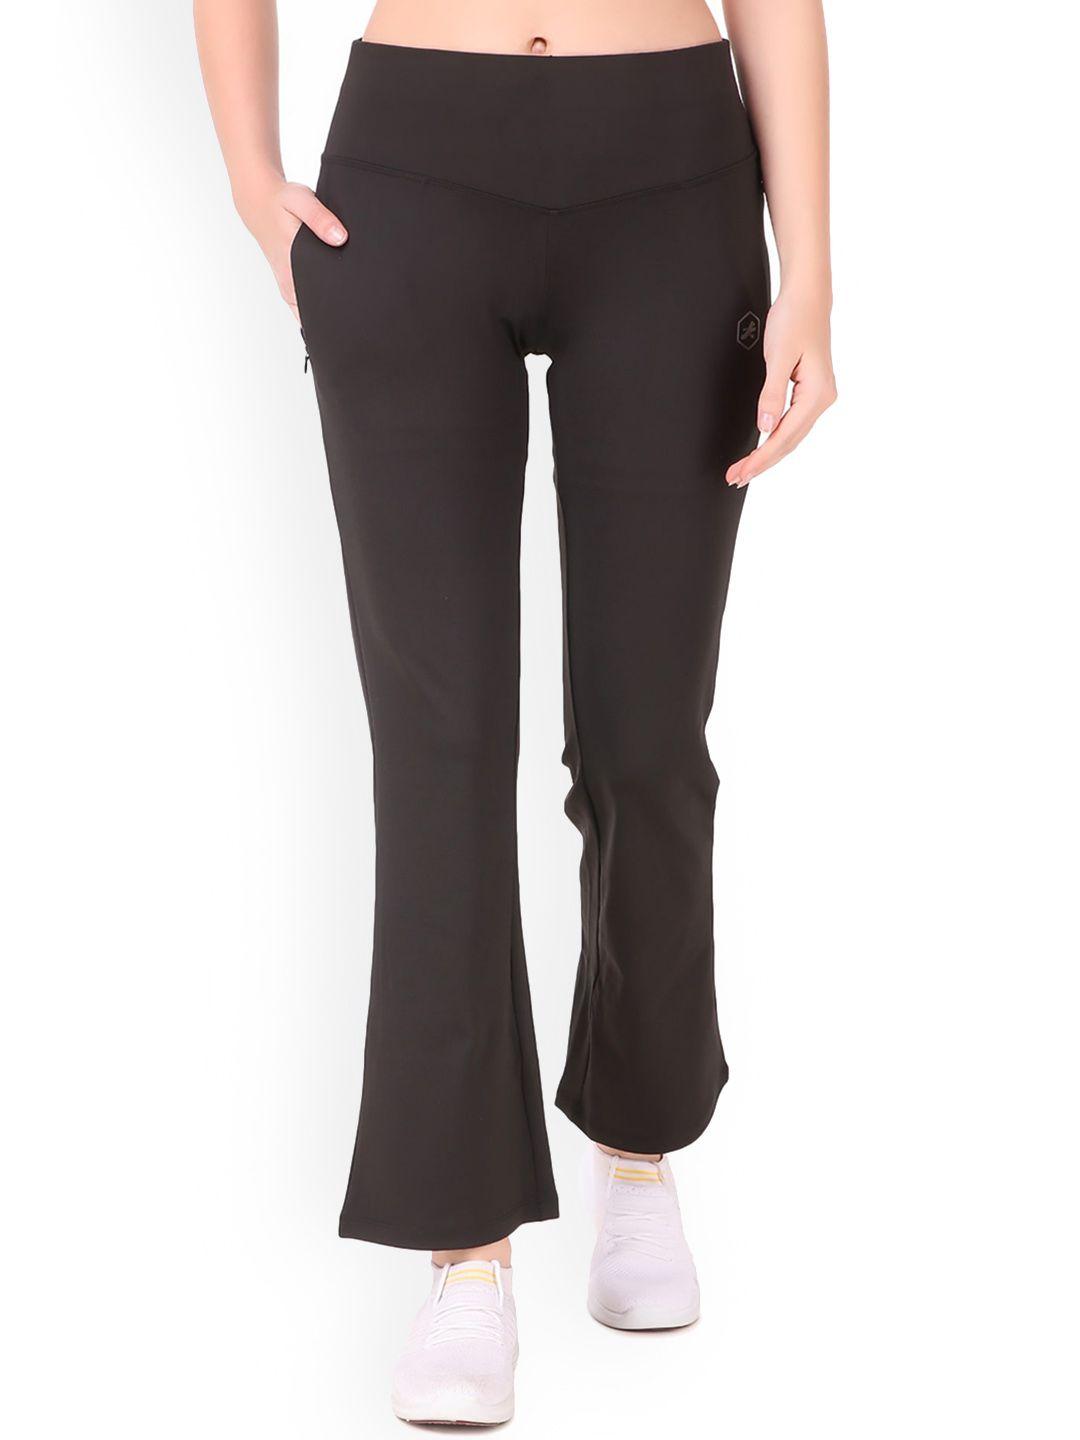 redesign women dry fit mid-rise bootcut track pants